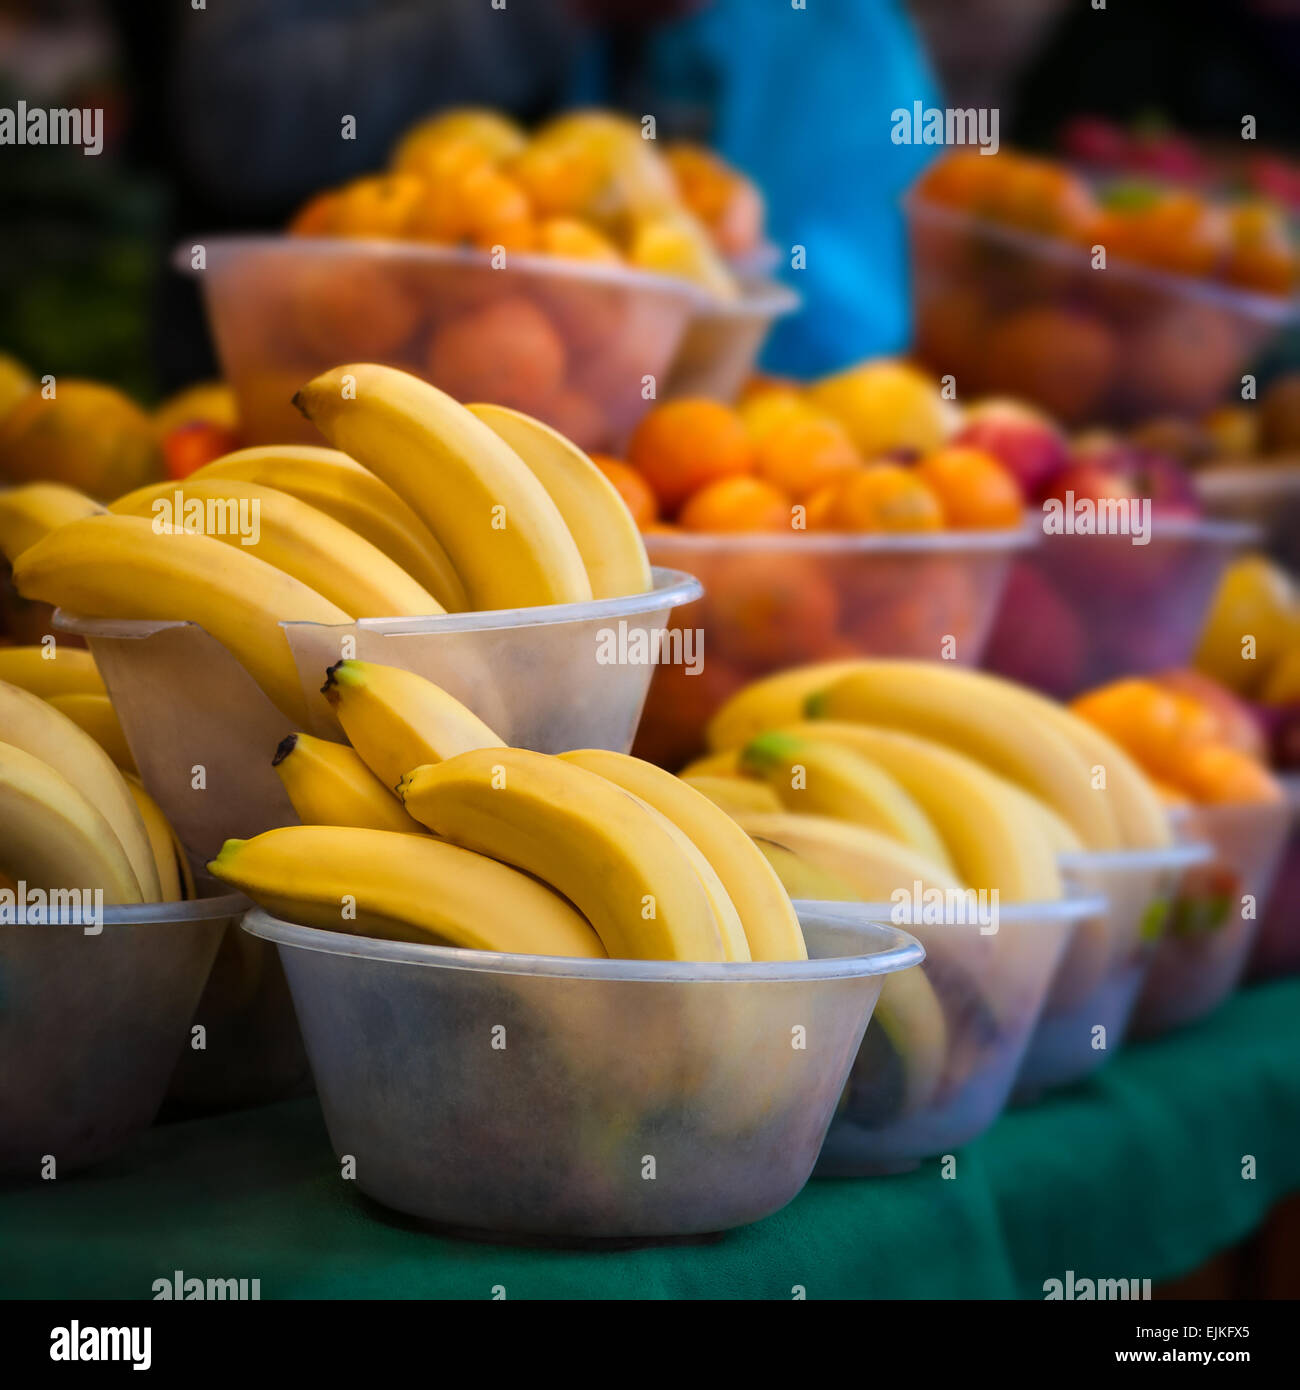 Outdoor farmer's market selling fruit in bowls. Stock Photo